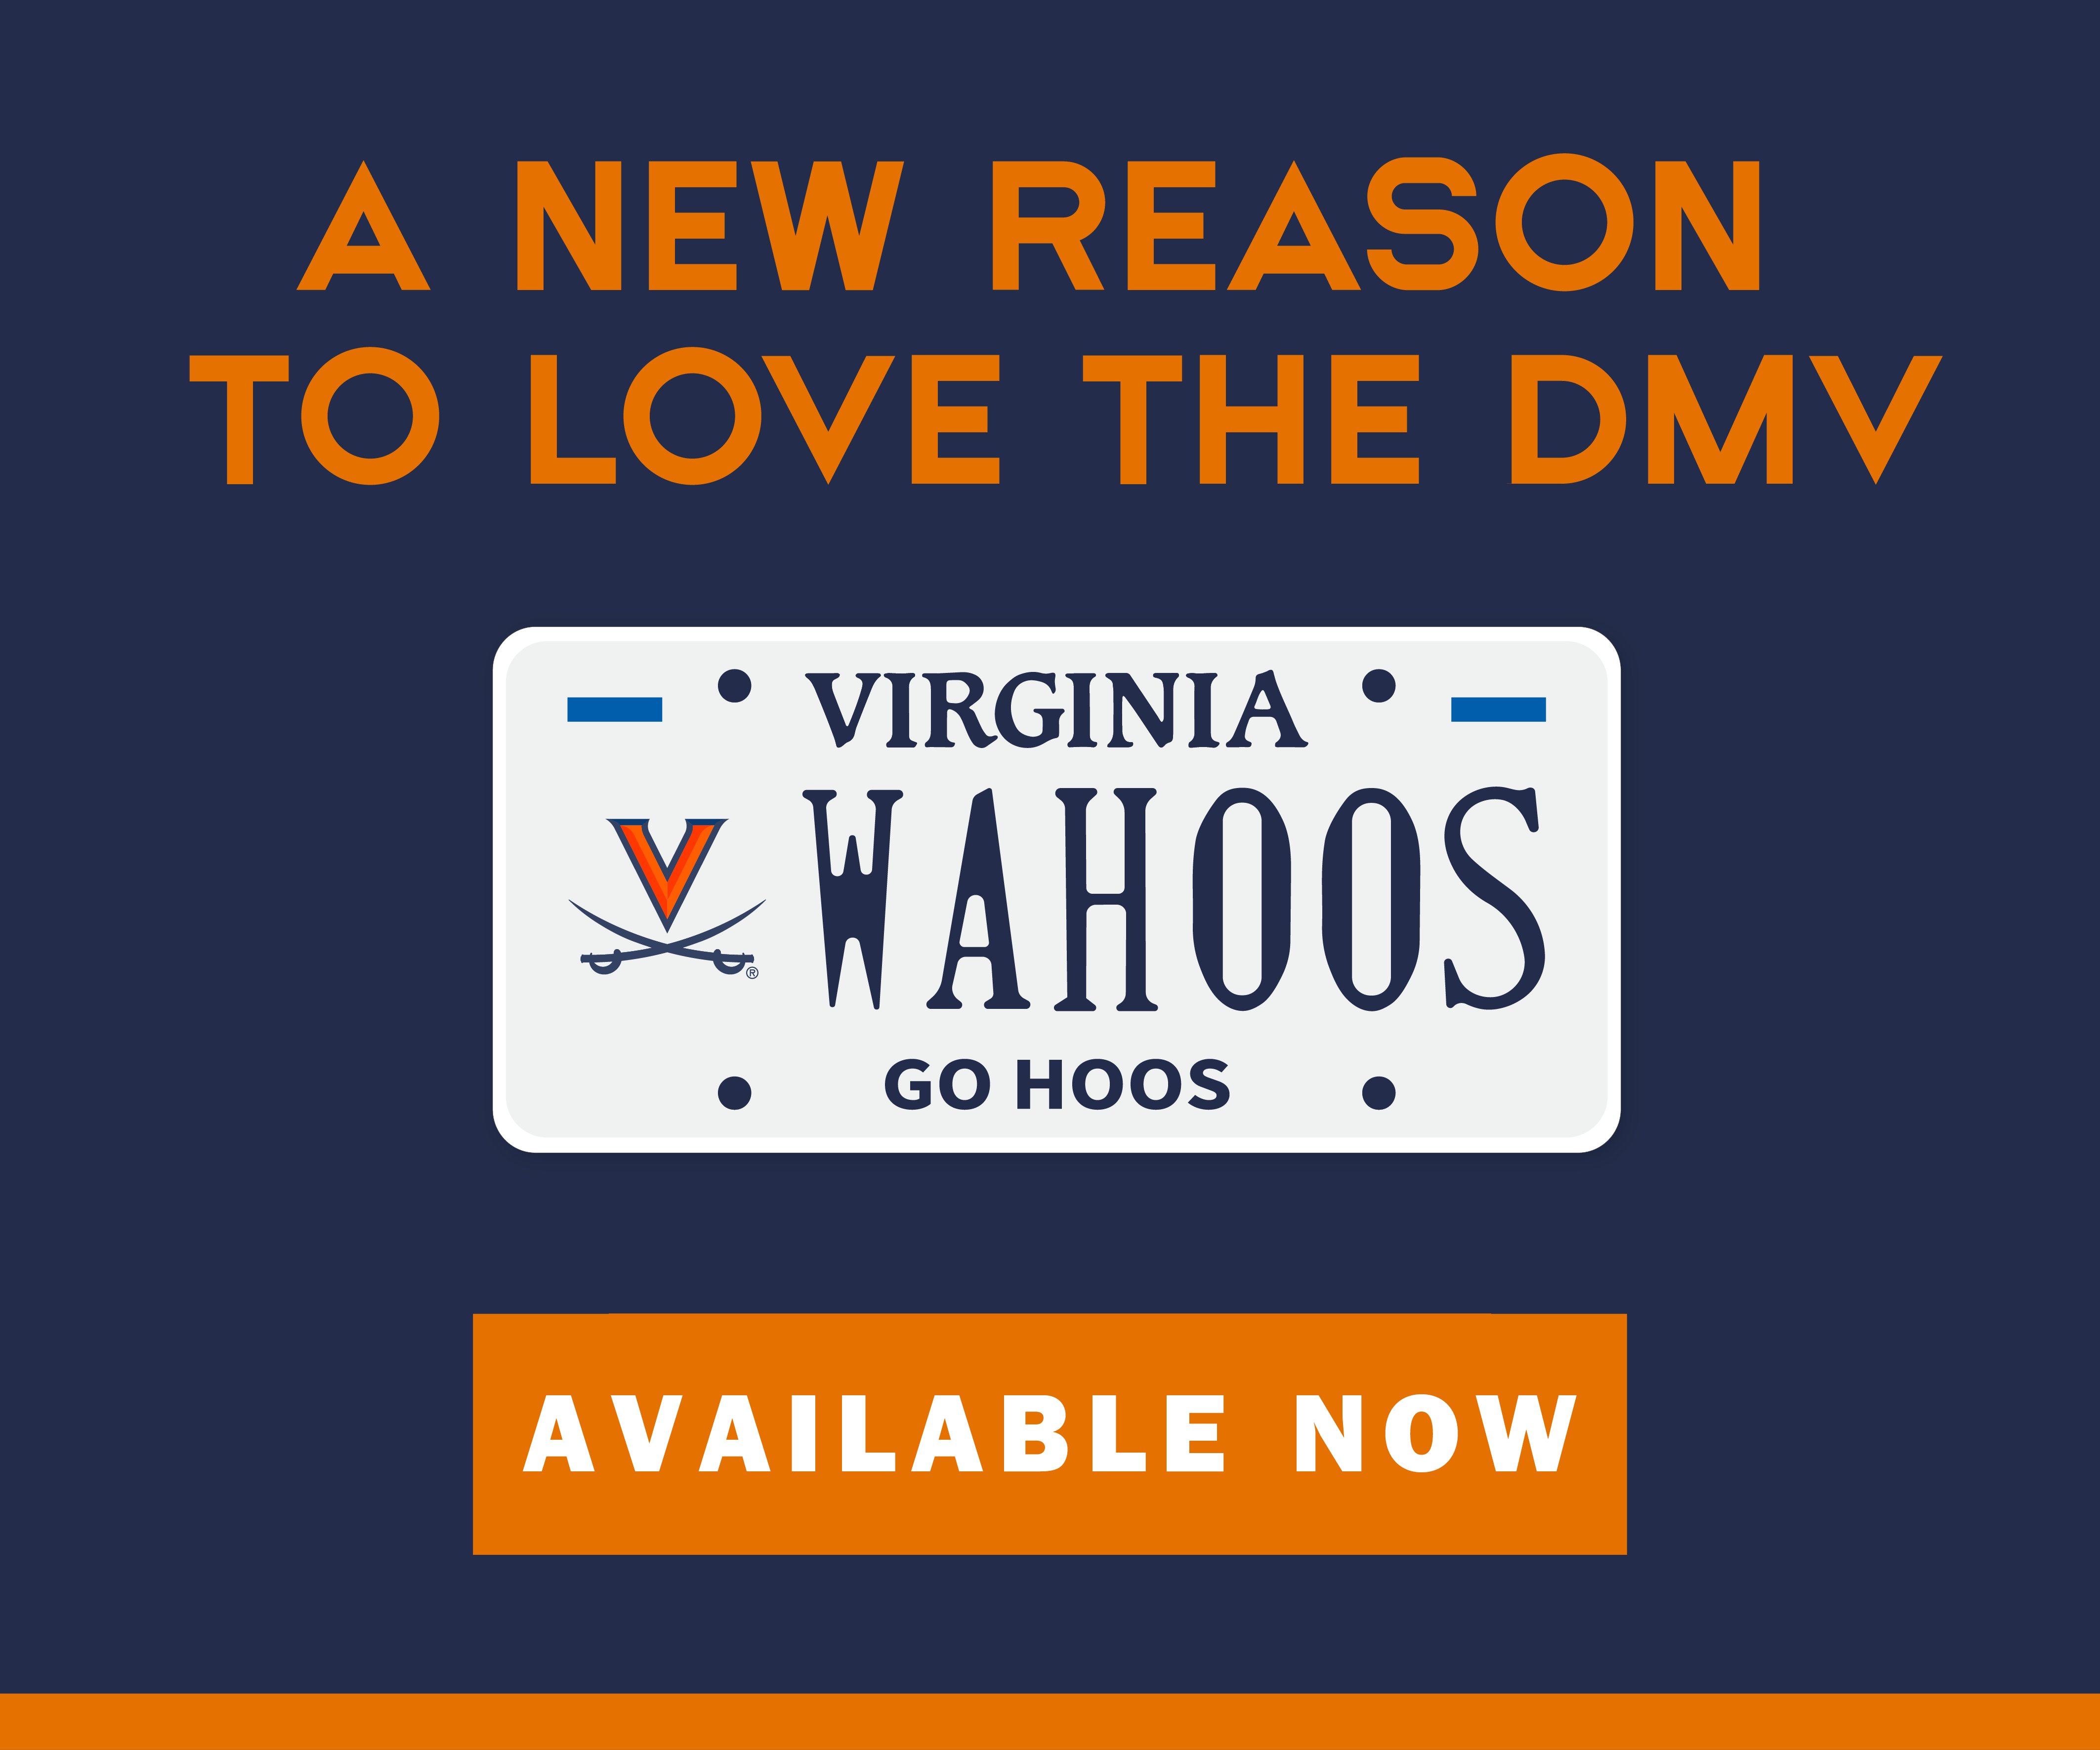 A New Reason to Love the DMV, Go Hoos License Plates, Available Now